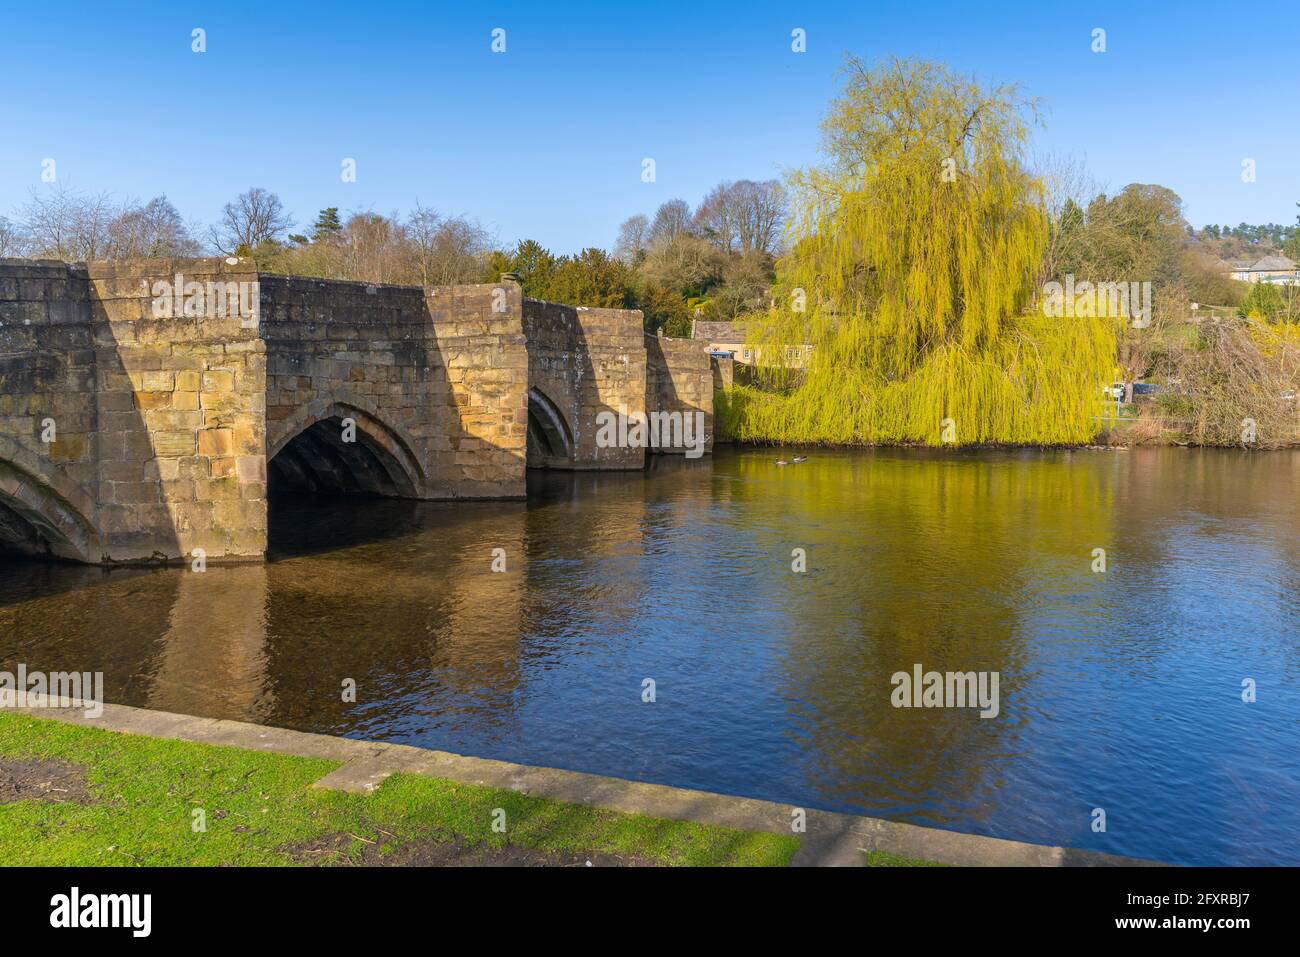 View of bridge over River Wye, Bakewell, Peak District National Park, Derbyshire, England, United Kingdom, Europe Stock Photo